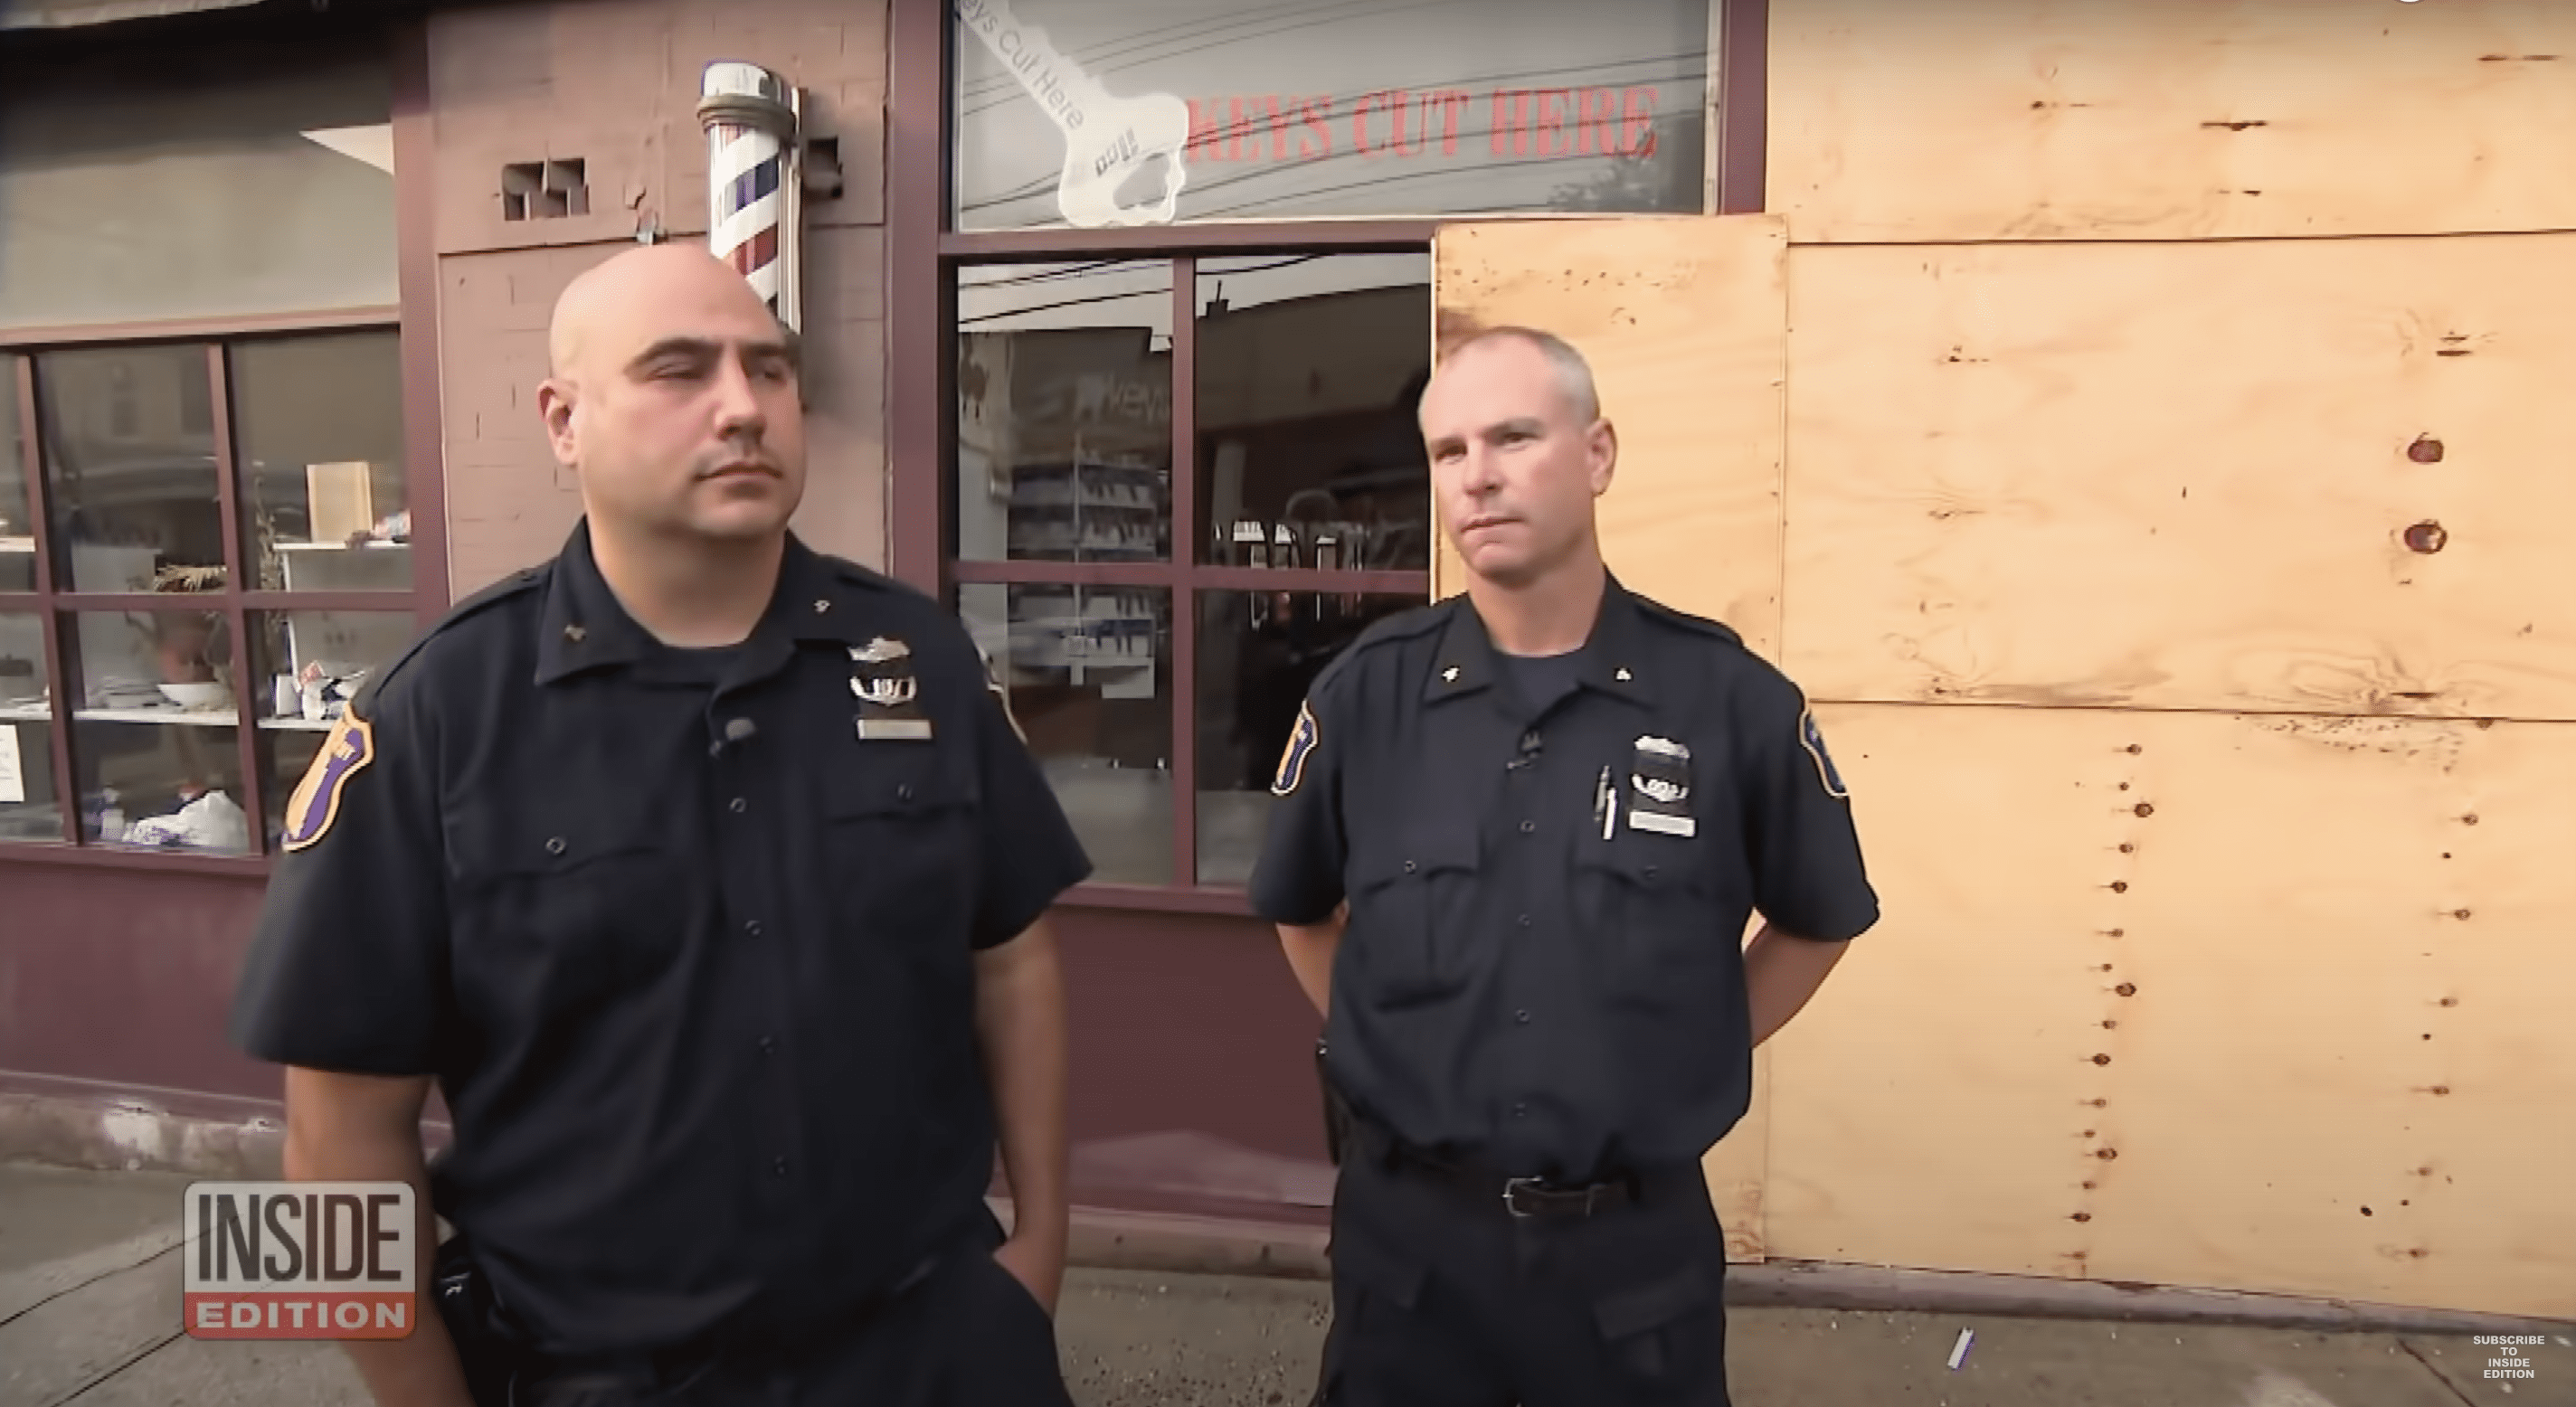 Yonkers Police Officers Rocco Fusco and Paul Samoyedny. | Photo: YouTube.com/Inside Edition